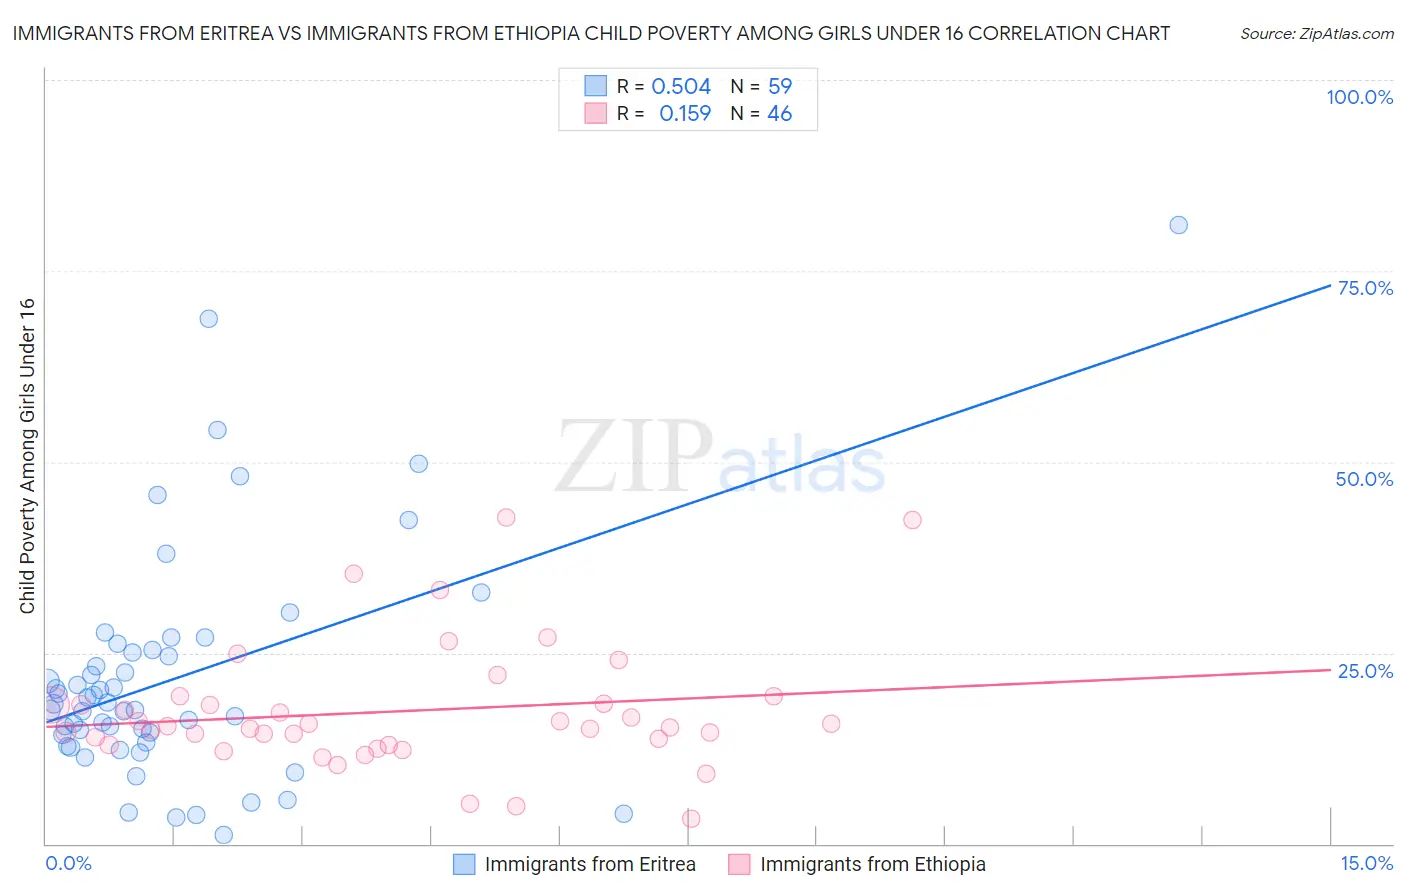 Immigrants from Eritrea vs Immigrants from Ethiopia Child Poverty Among Girls Under 16